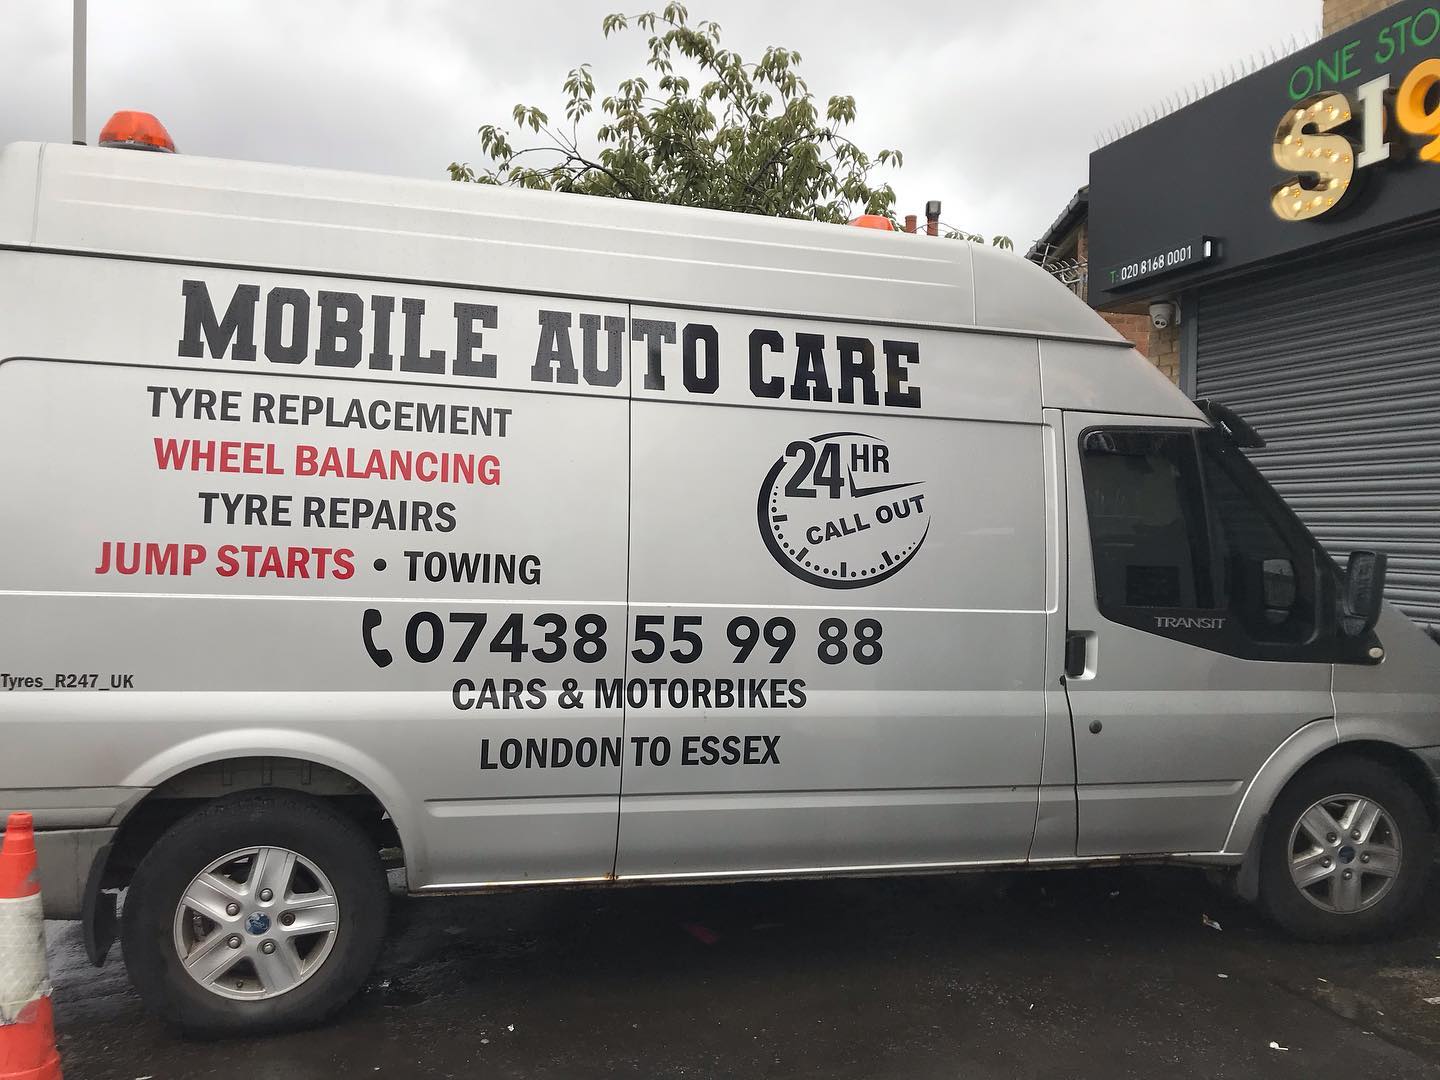 Mobile Auto Care Van Sign Writing